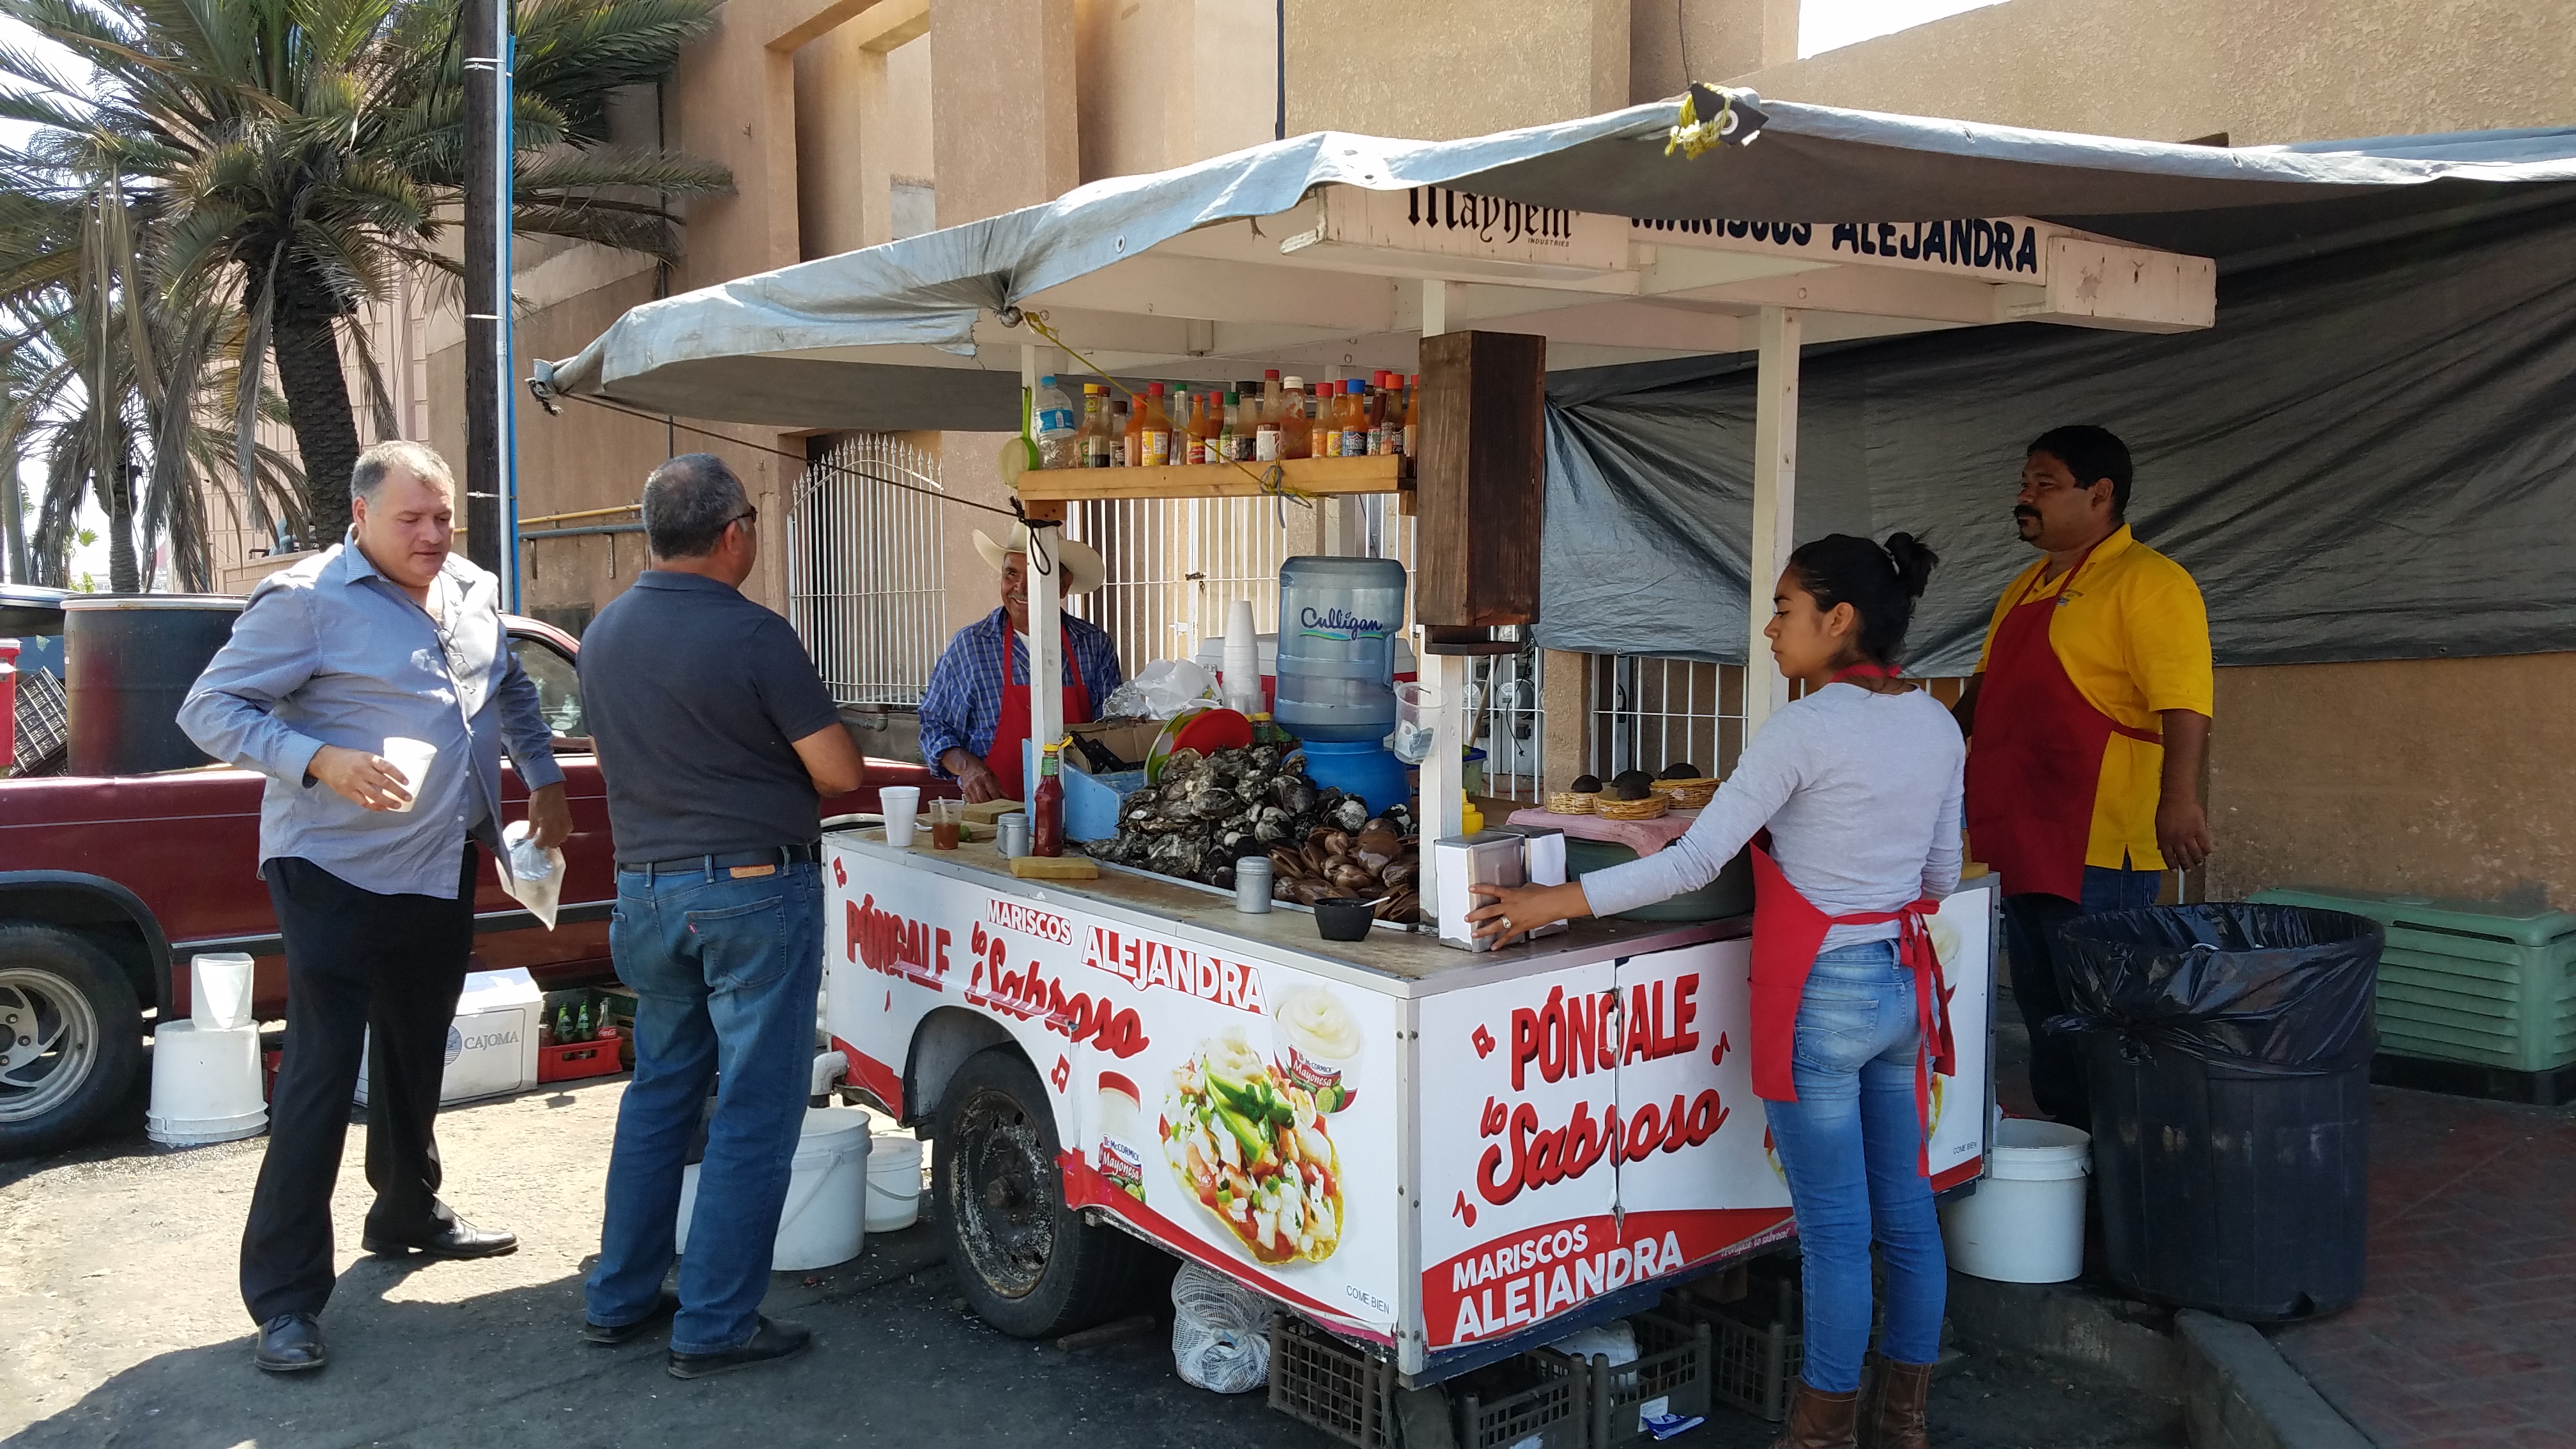 typical street food cart